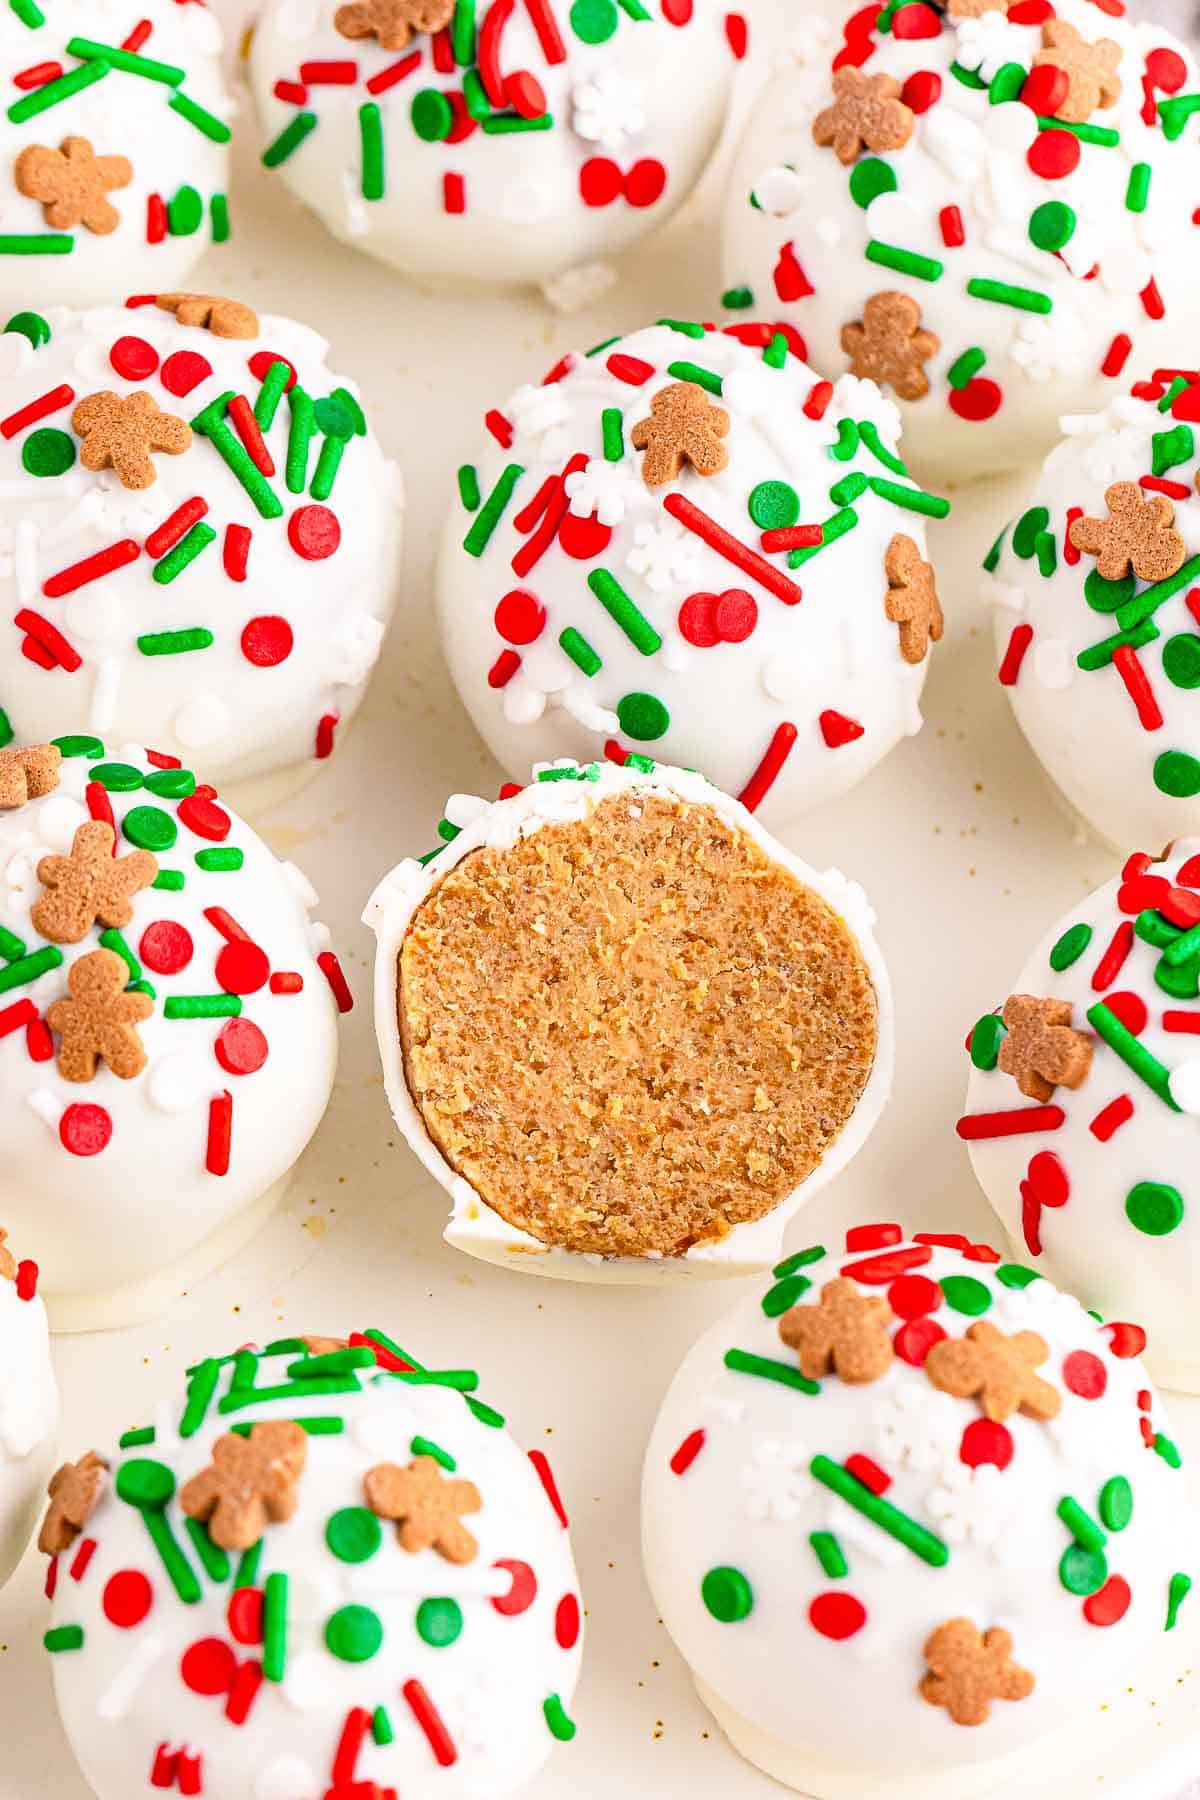 Several gingerbread truffles with sprinkles on a white plate.